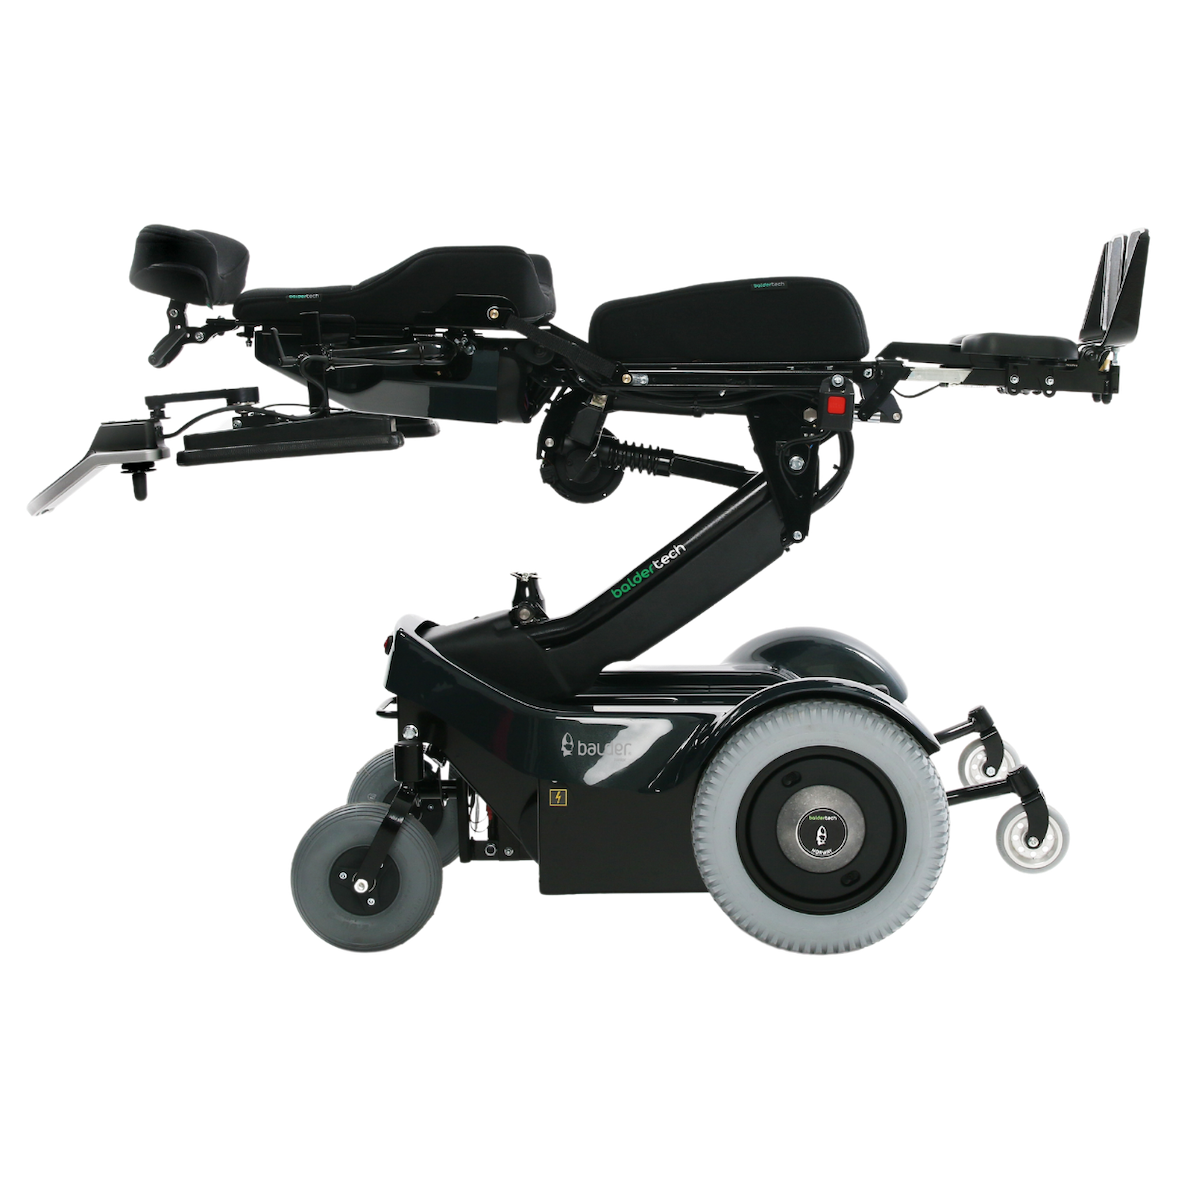 A Balder Junior J340 childrens standing powerchair. Shown in a laying flat position